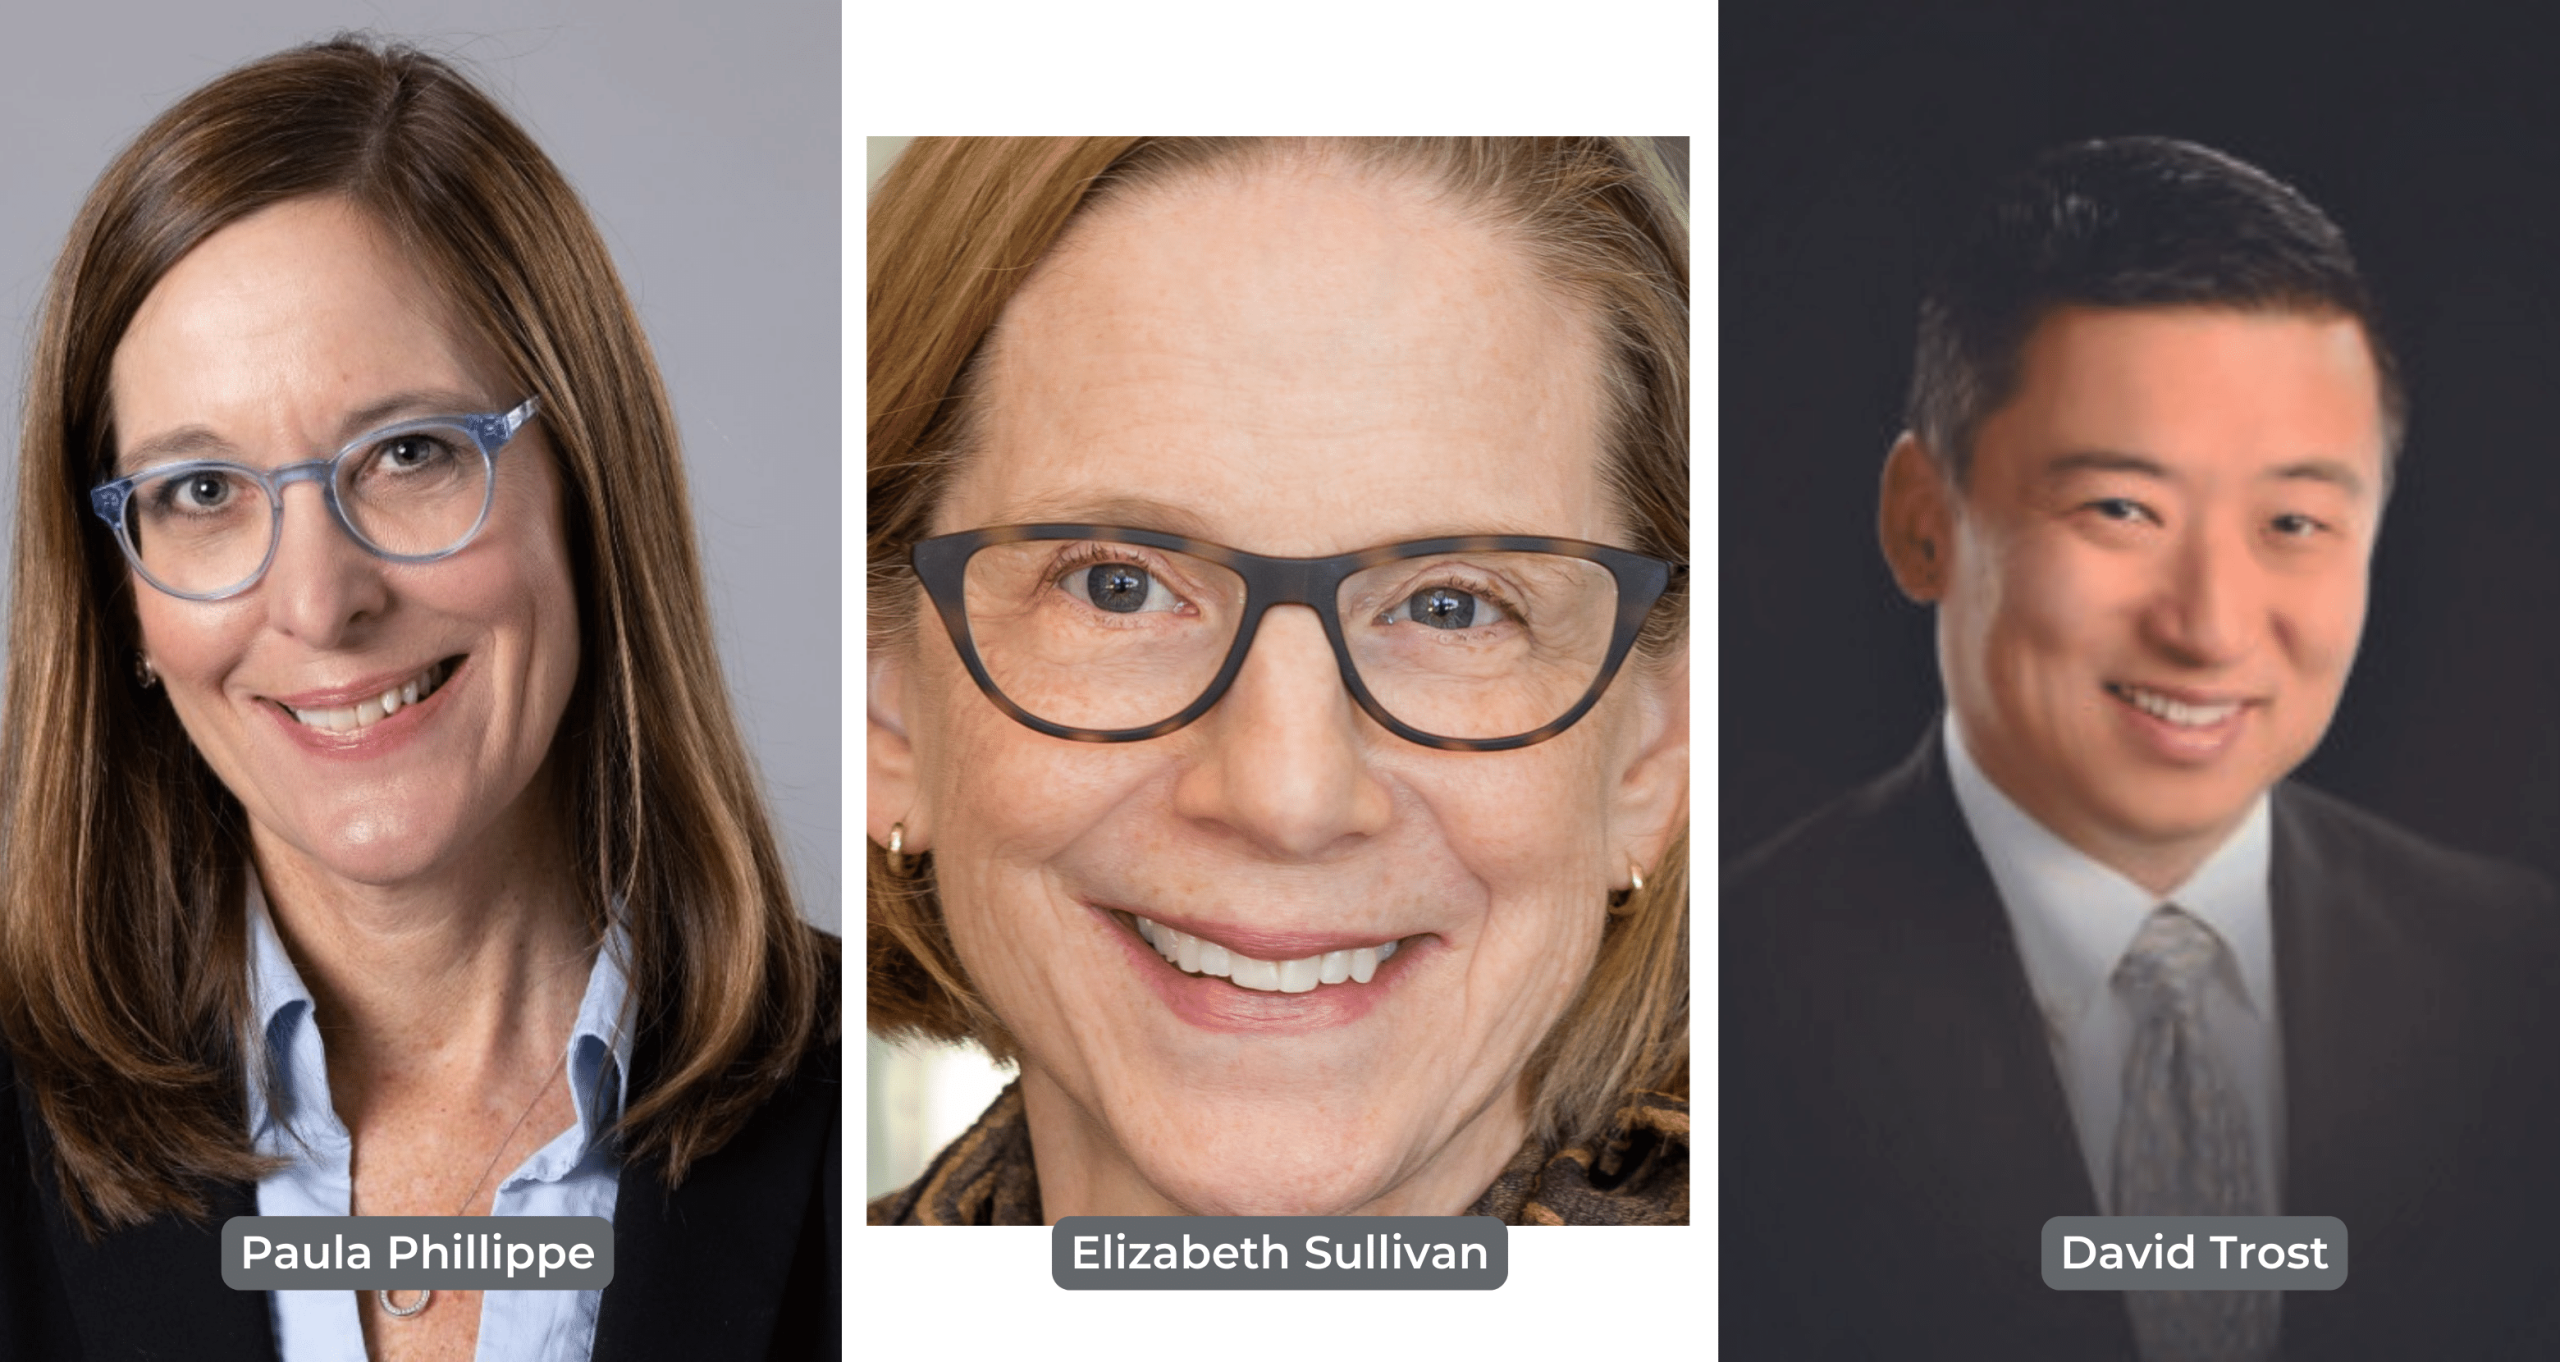 Lutheran Services in America Welcomes Three New Members to its Board of Directors to Support Growth and Innovation